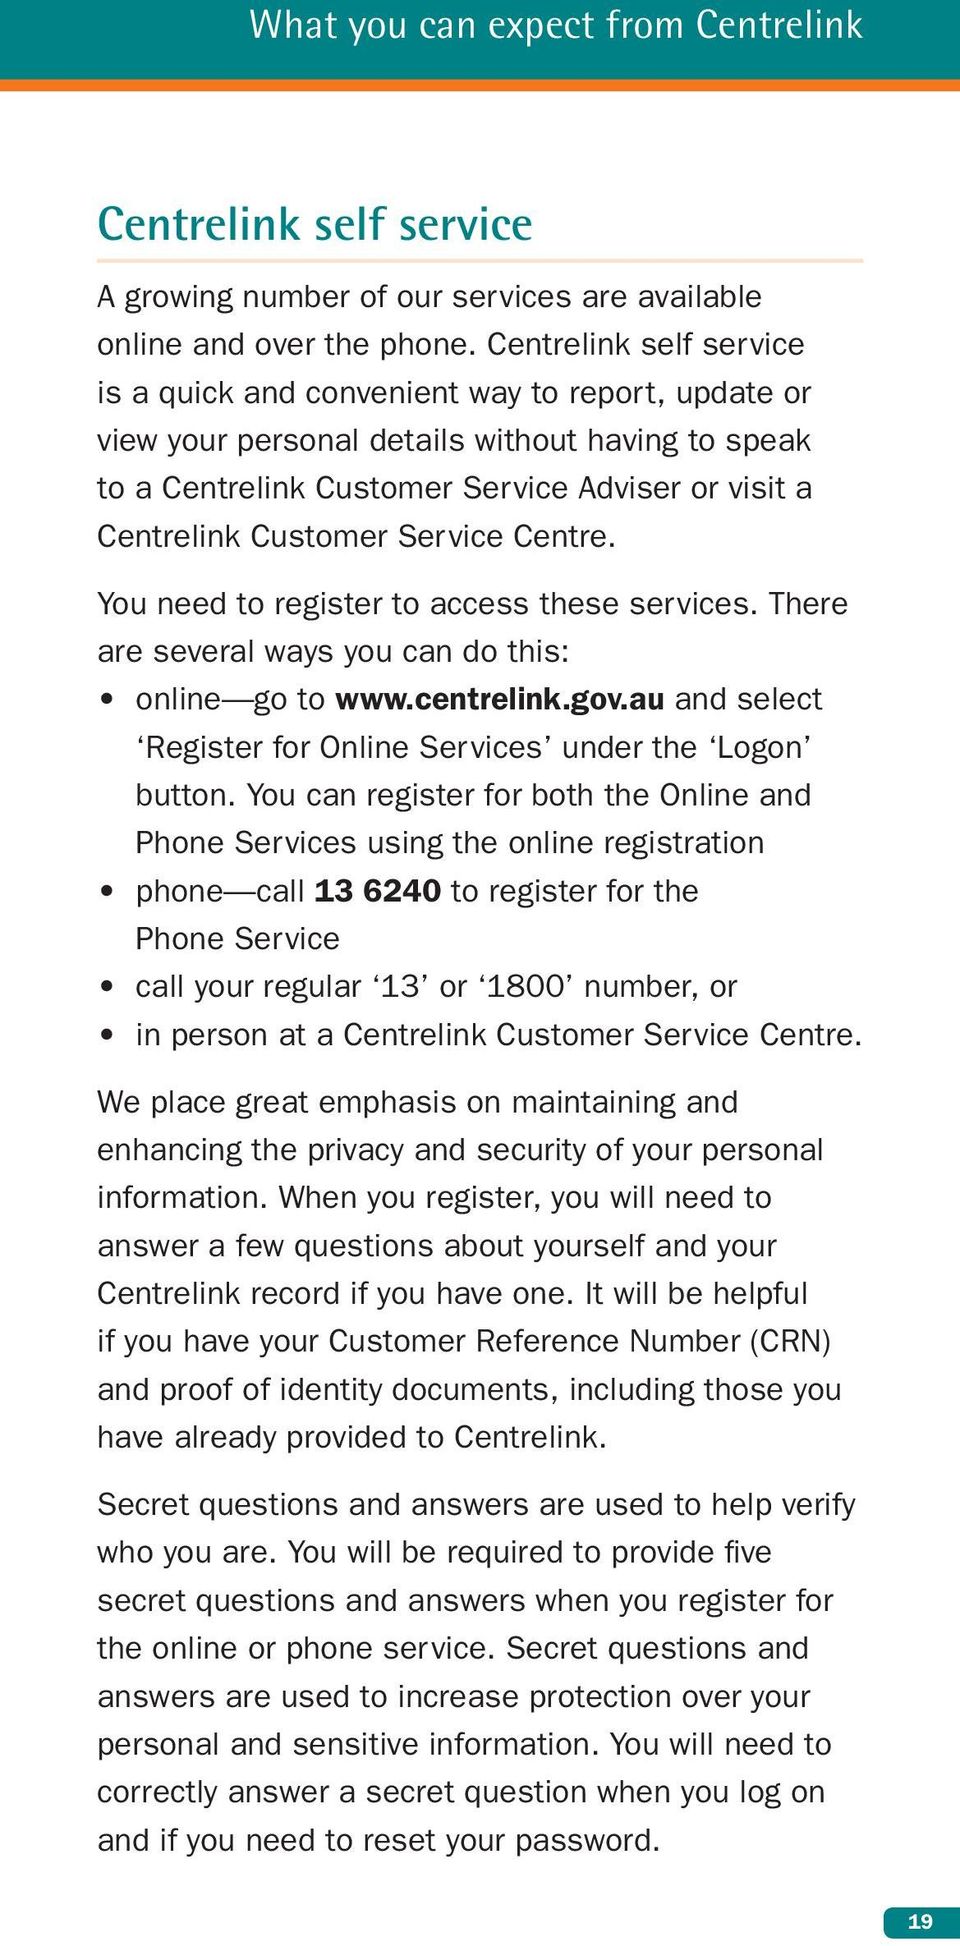 Service Centre. You need to register to access these services. There are several ways you can do this: online go to www.centrelink.gov.